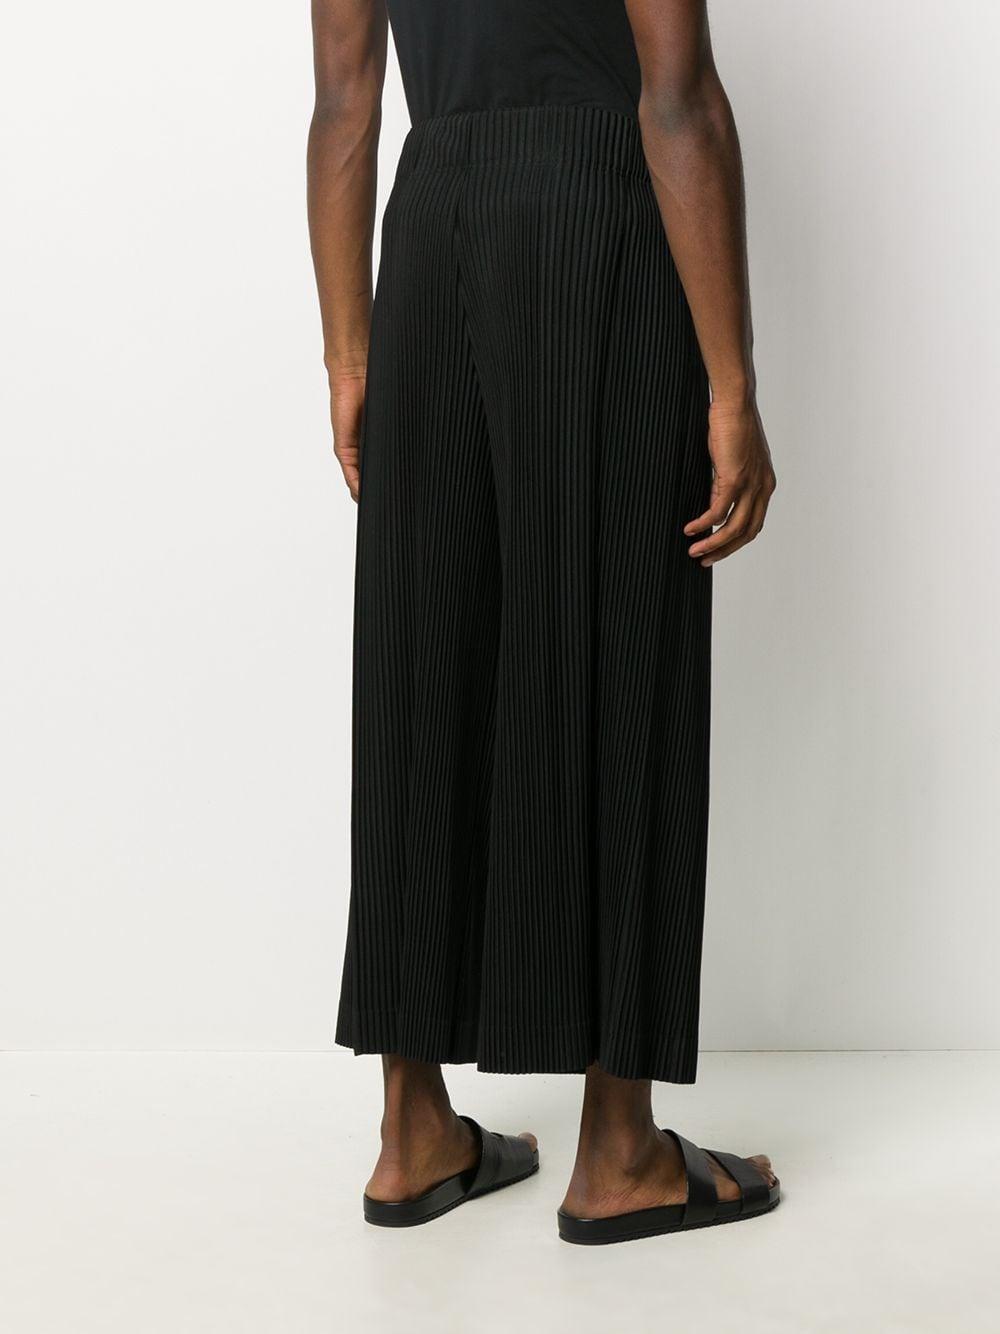 Homme Plissé Issey Miyake Pleated Wide Leg Trousers in Black for Men - Lyst